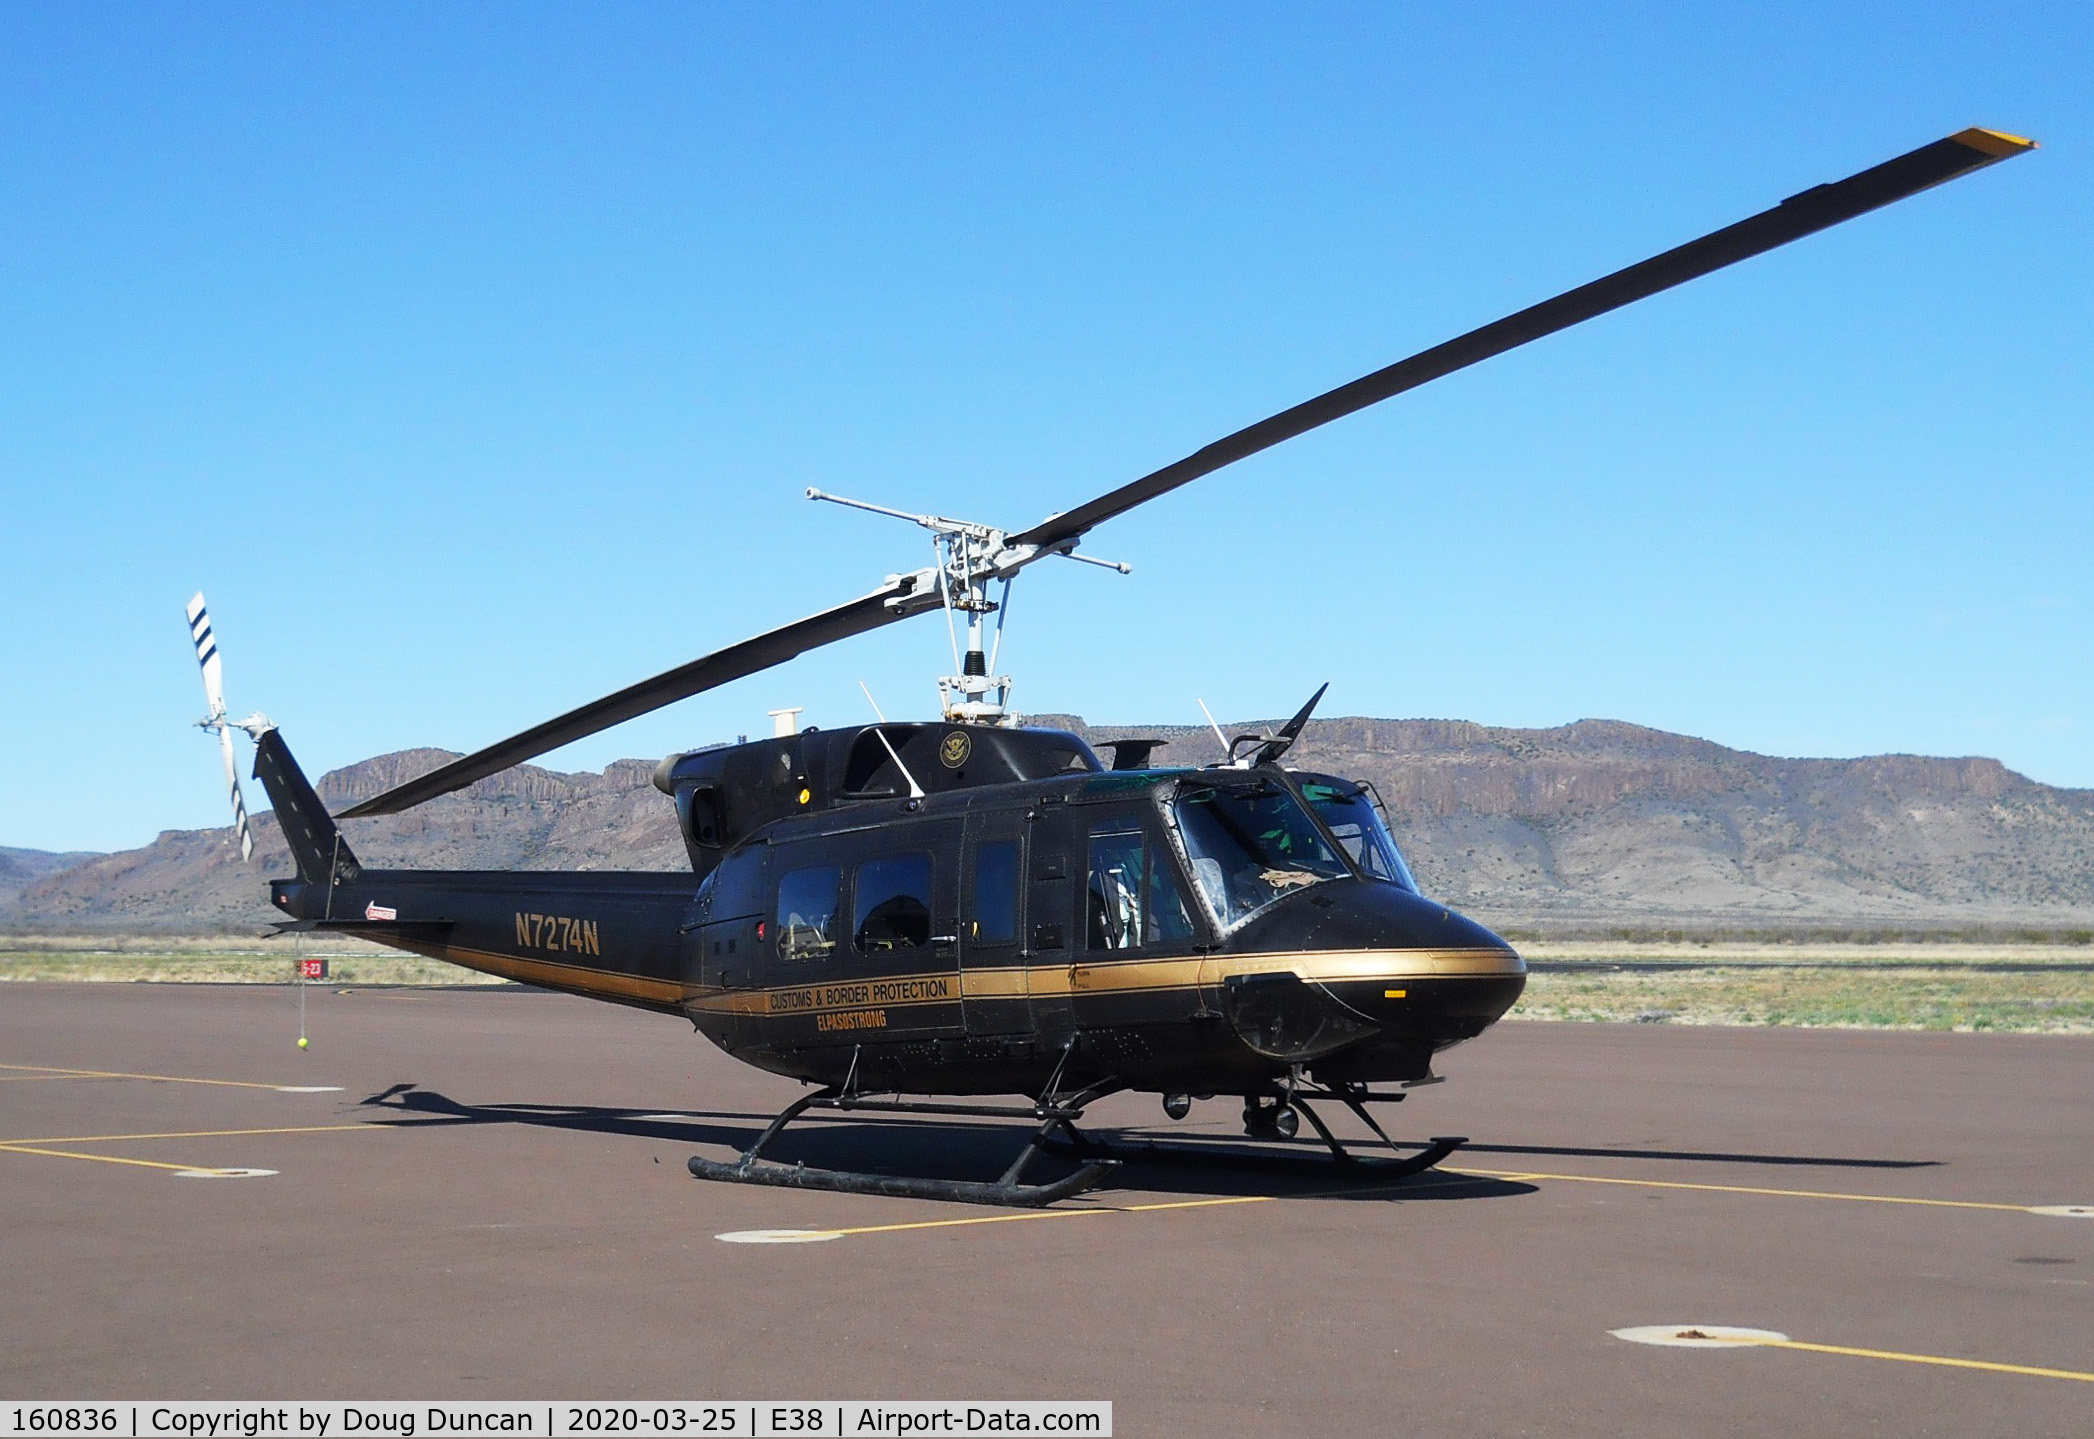 160836, Bell UH-1N Iroquois C/N 31779, Now in service with Customs and Border Protection out of El Paso, Texas. Seen at Casparis Airport in Alpine, Texas.